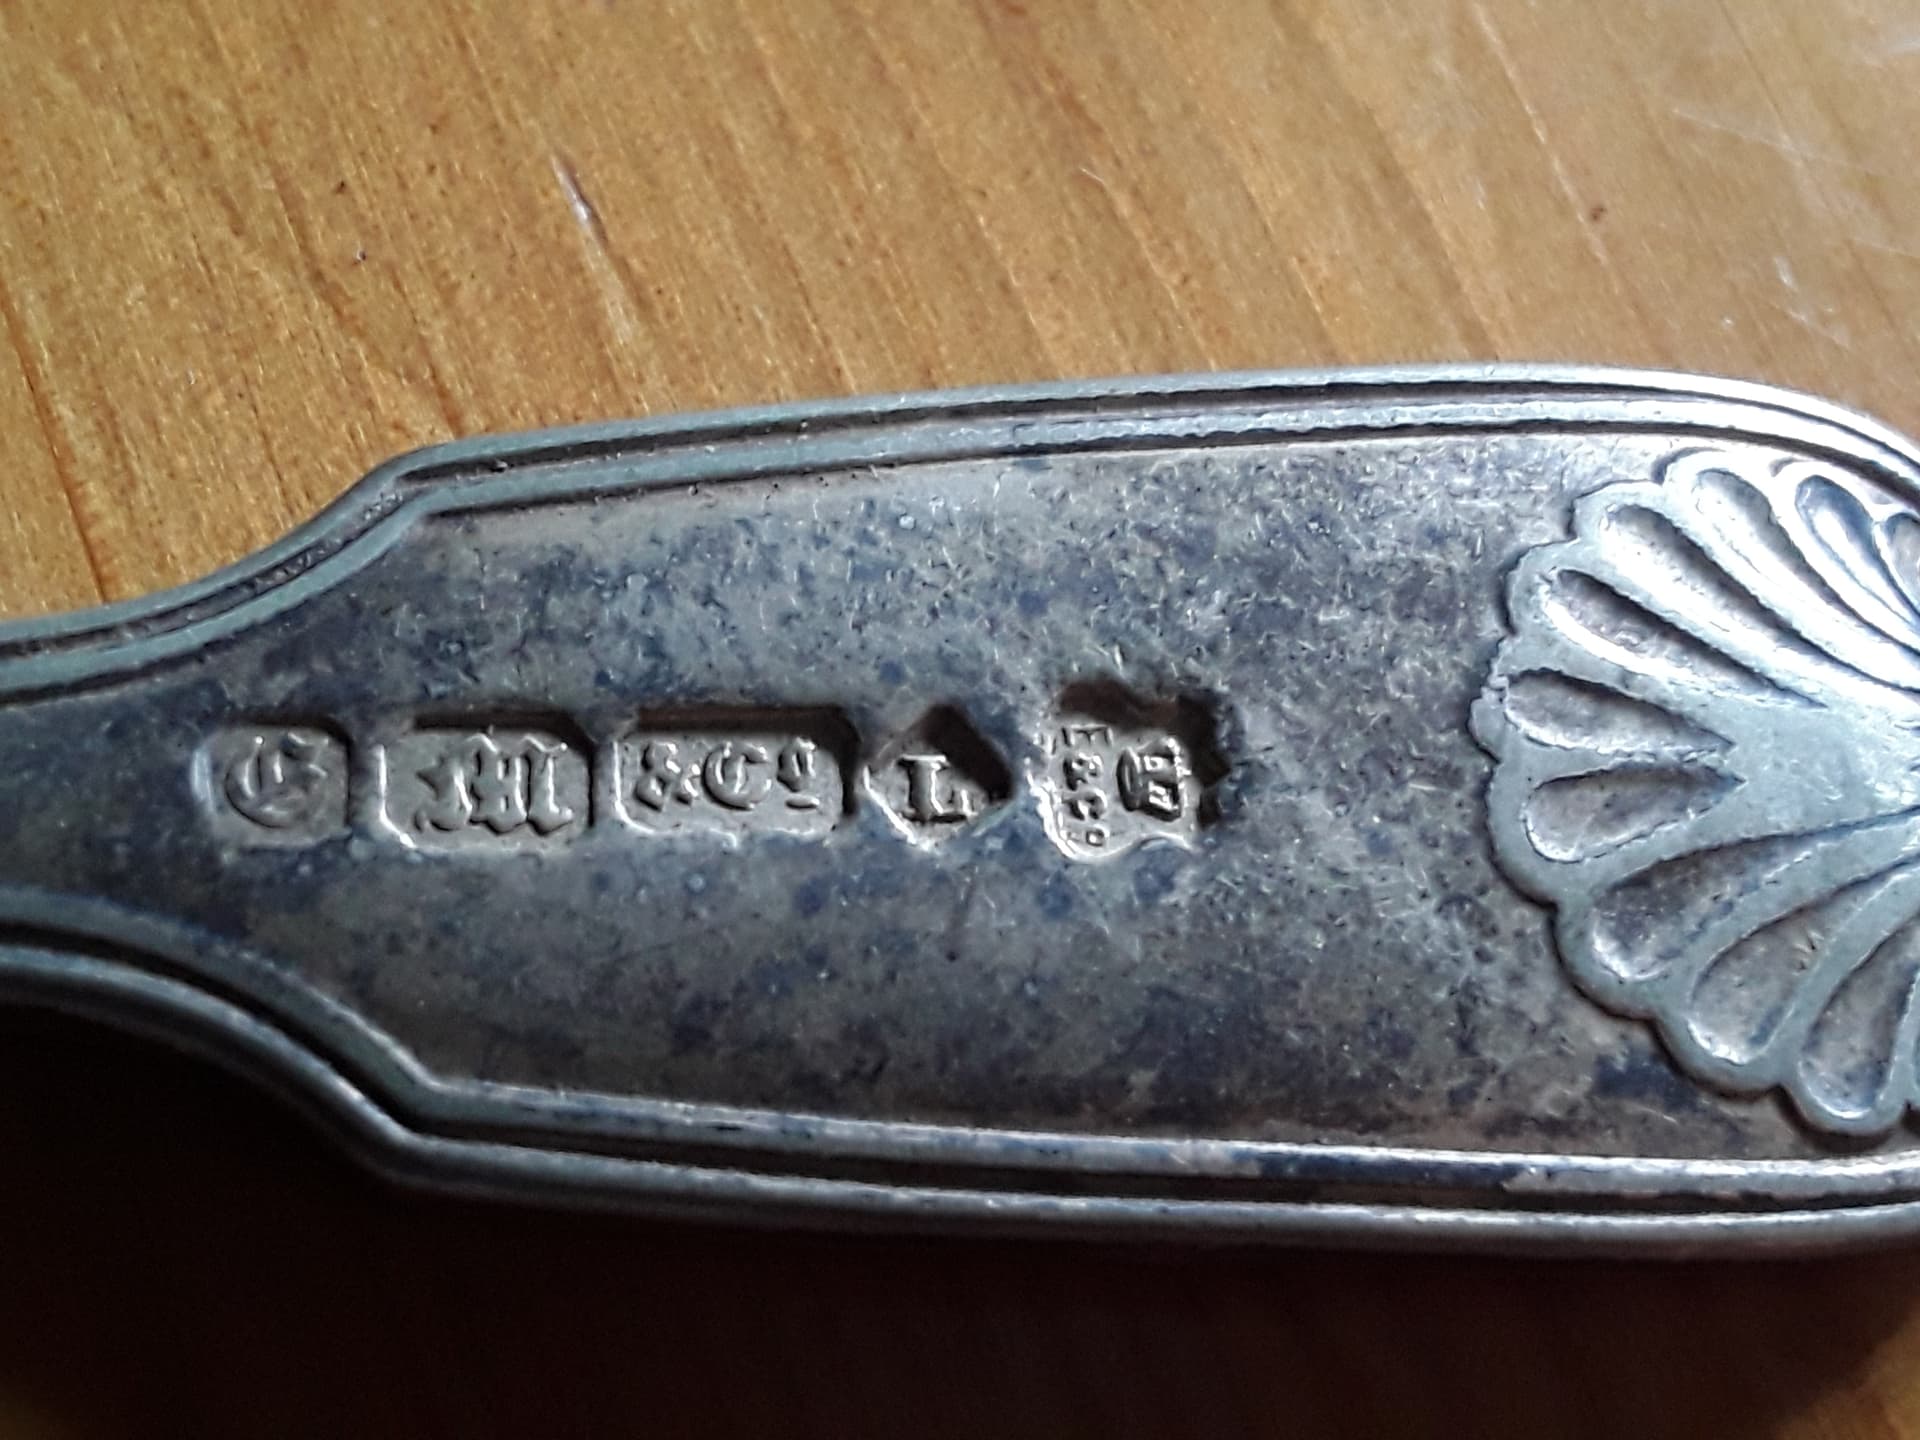 Help with this fork please - Identification Help - What is it? - Silver ...